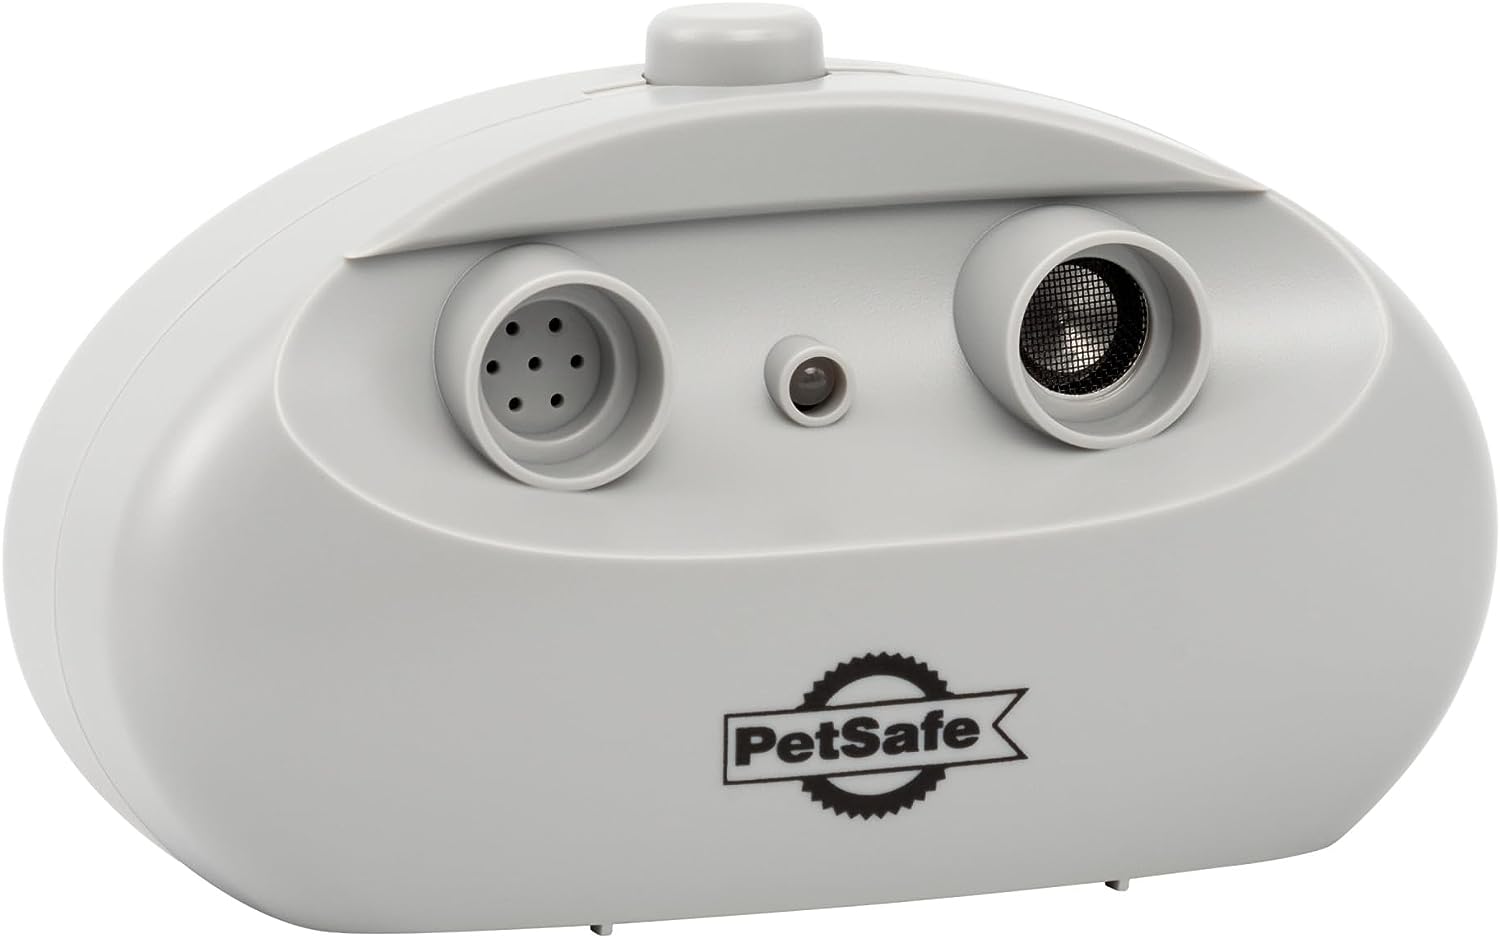 PetSafe Indoor Ultrasonic Dog Bark Control - No Collar Needed - Up to 25 ft Range - Anti-Bark Pet Training System - Automatic with Manual Trainer Button